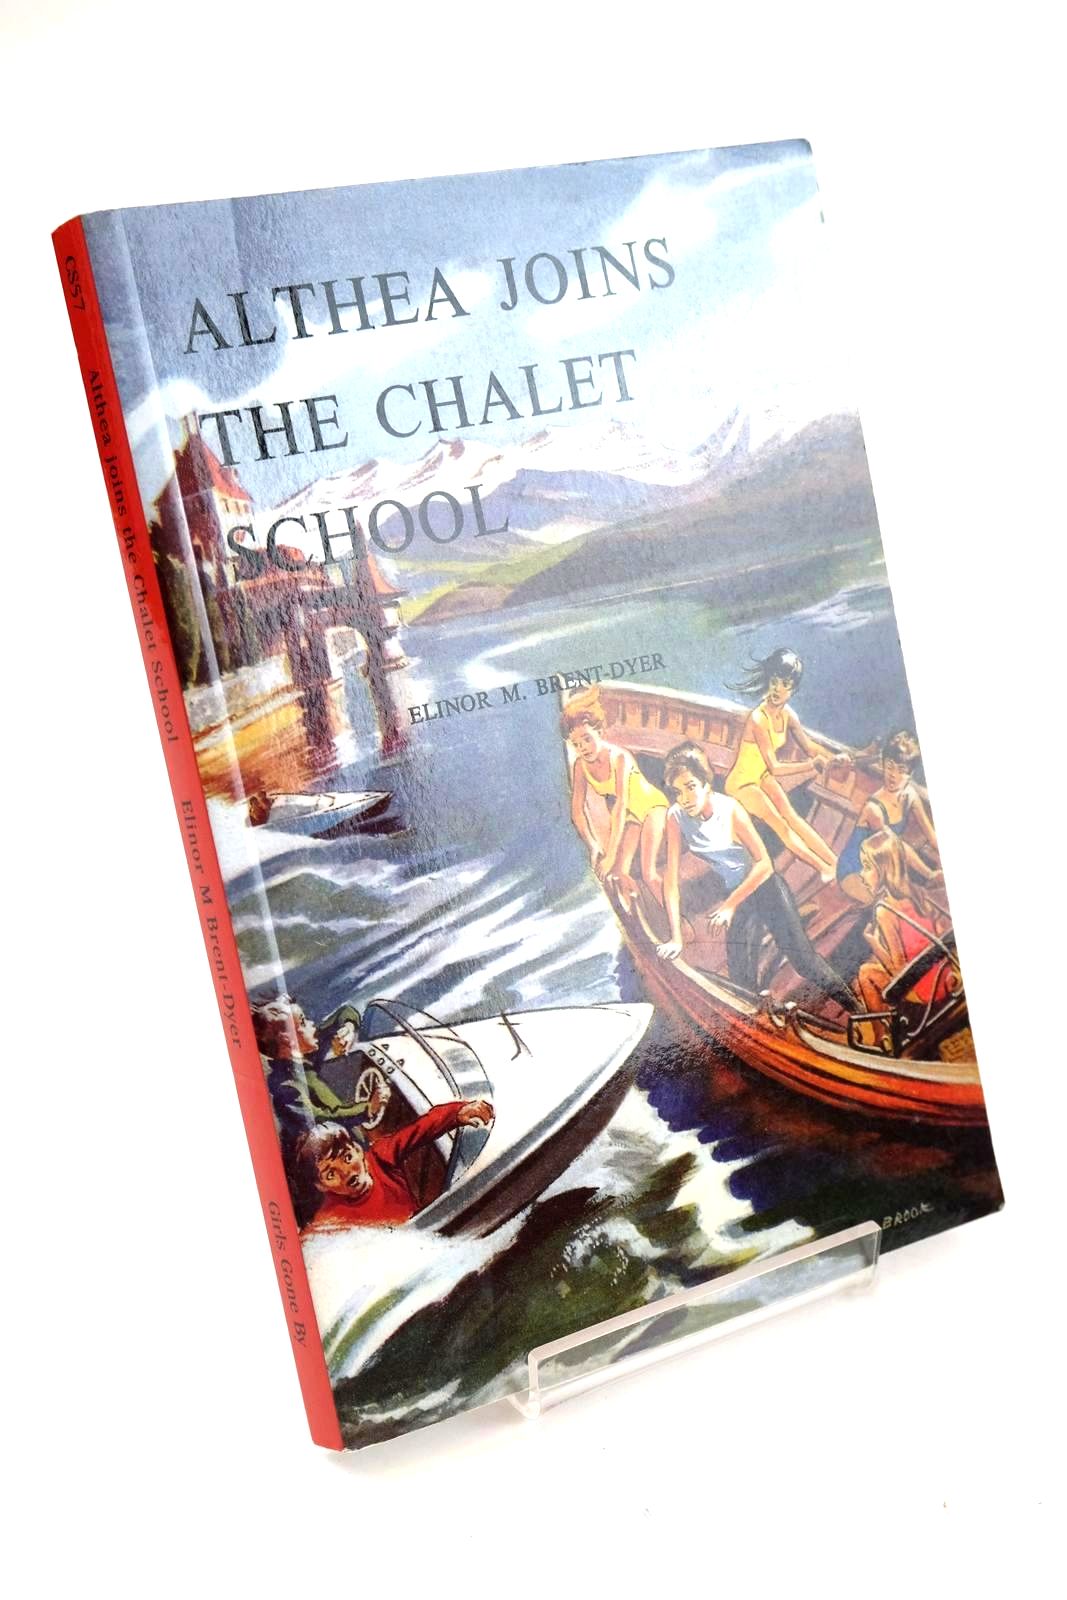 Photo of ALTHEA JOINS THE CHALET SCHOOL written by Brent-Dyer, Elinor M. illustrated by Brook, D. published by Girls Gone By (STOCK CODE: 1324196)  for sale by Stella & Rose's Books